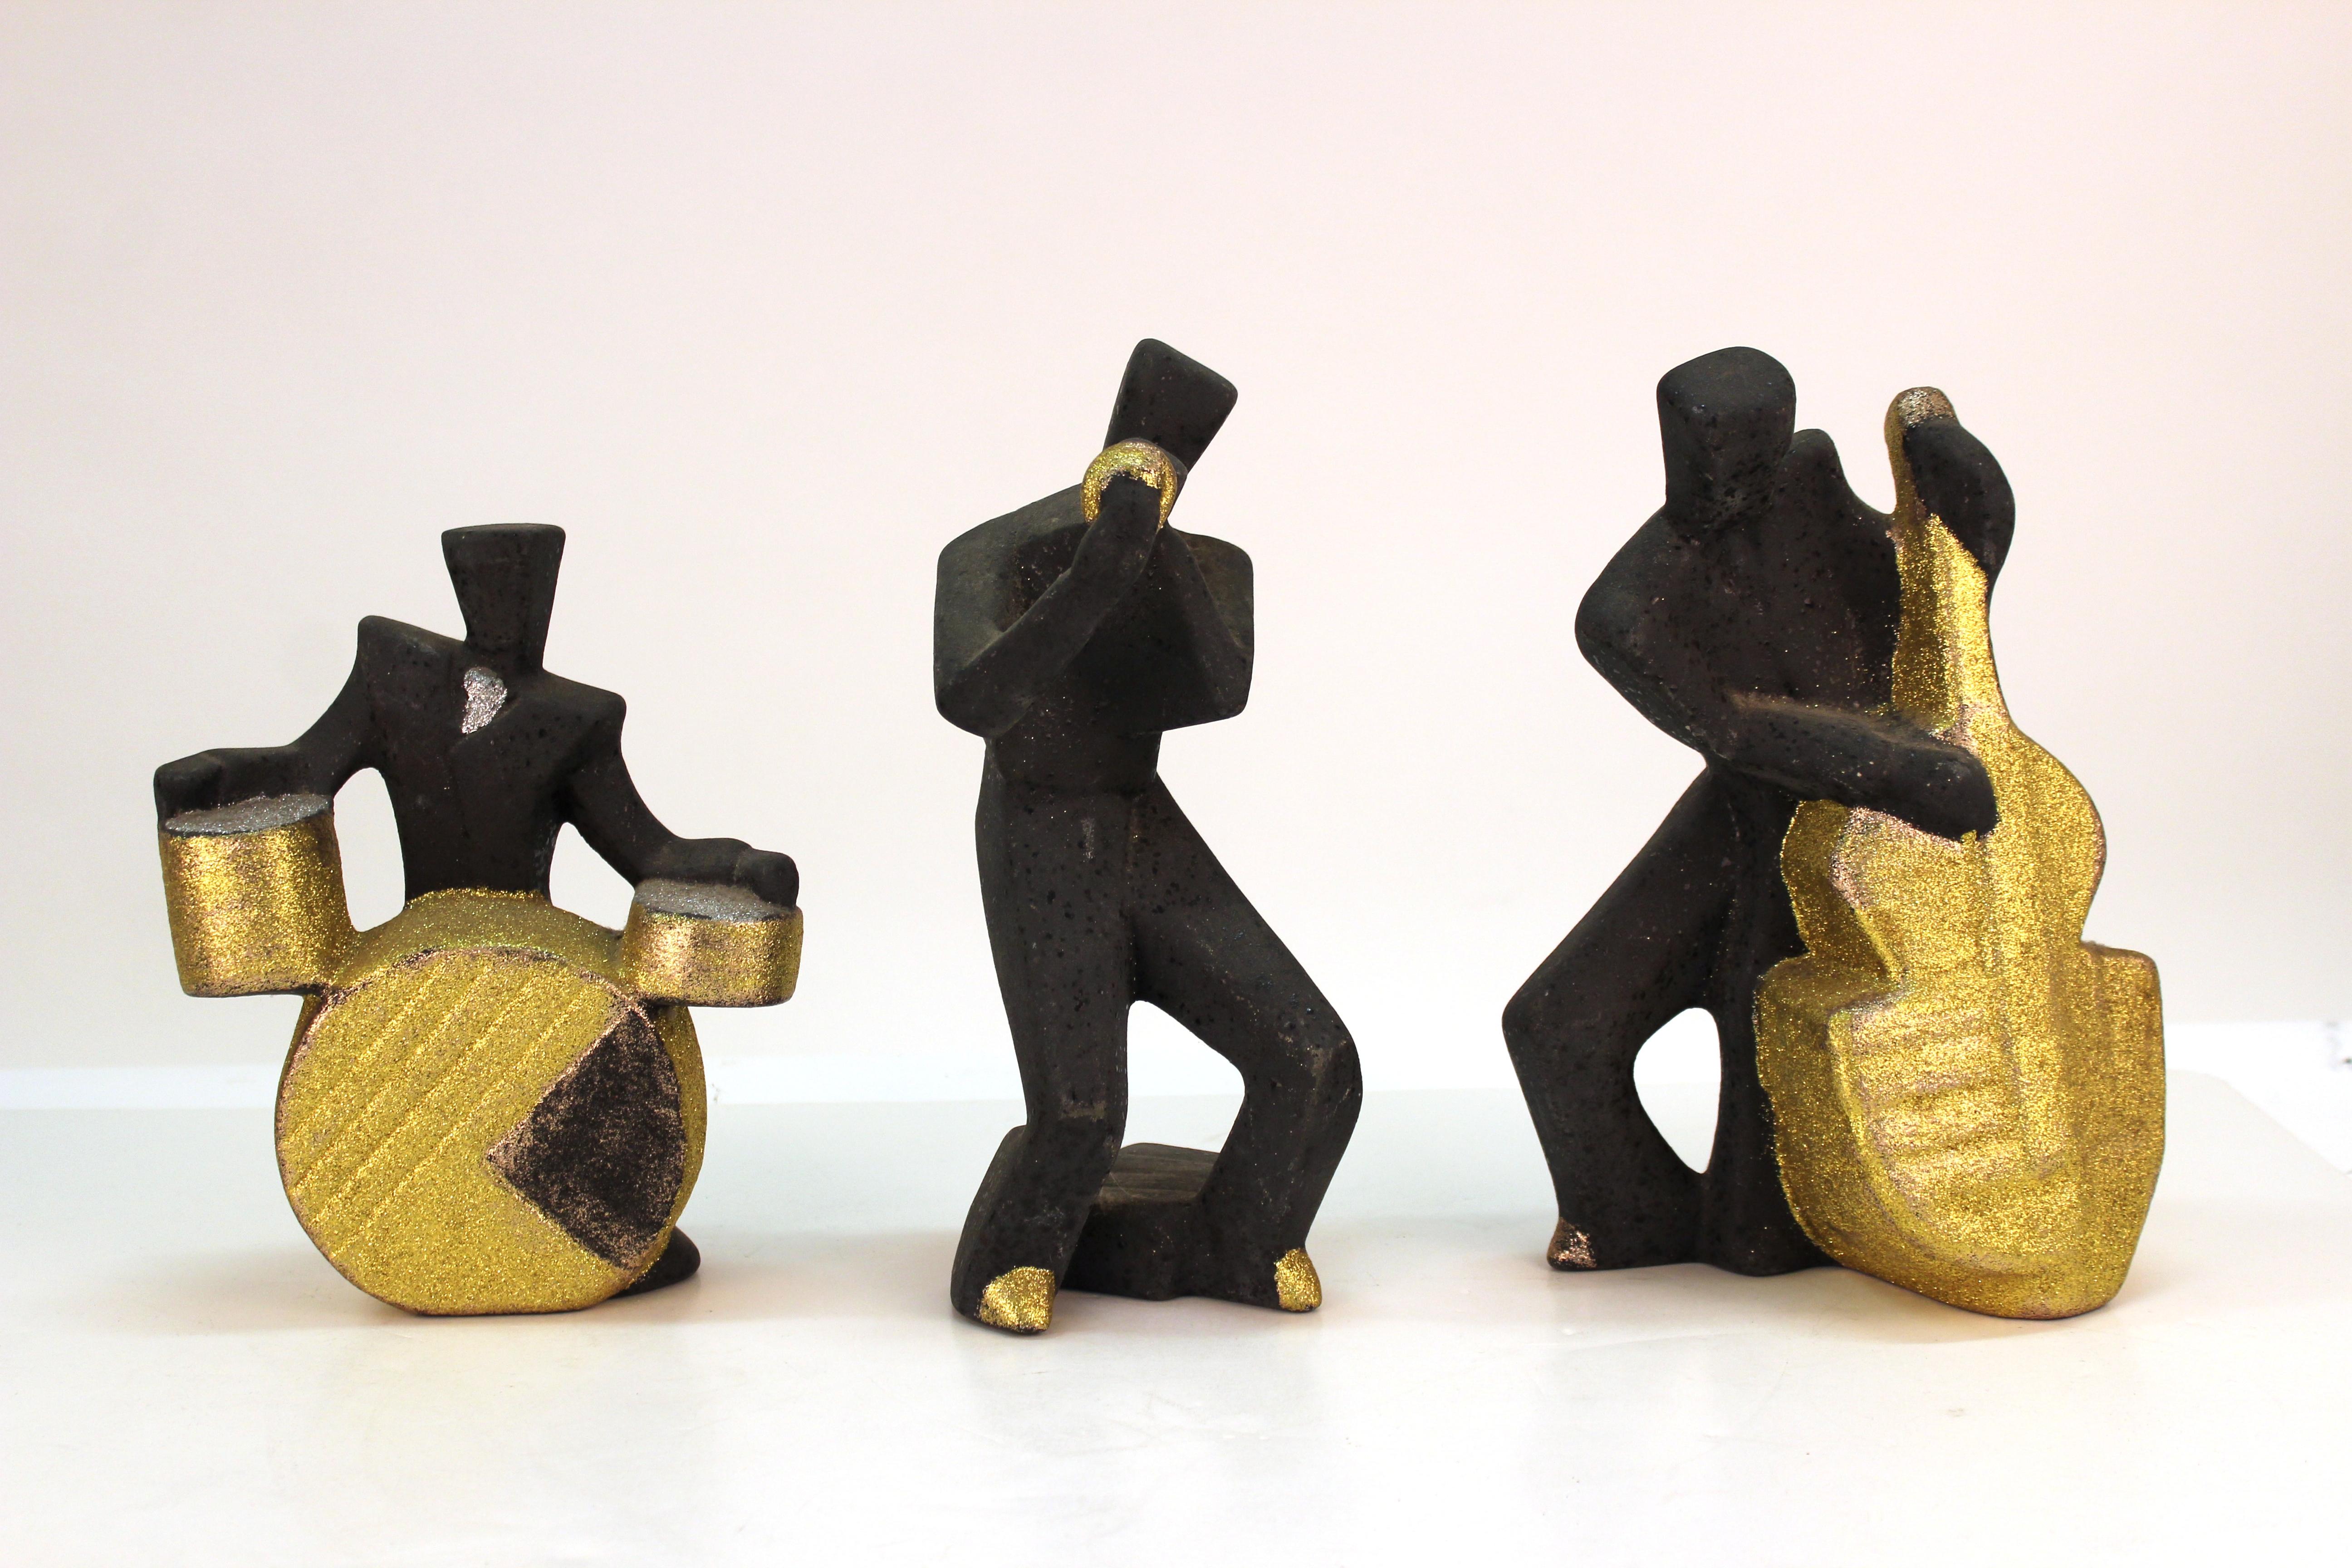 Postmodern Cubist style ceramic jazz sculpture set, partly glittered and painted, signed and dated 'Yvette 93' on the bottom. The set of six figures dates from the 1990s and is in good vintage condition.